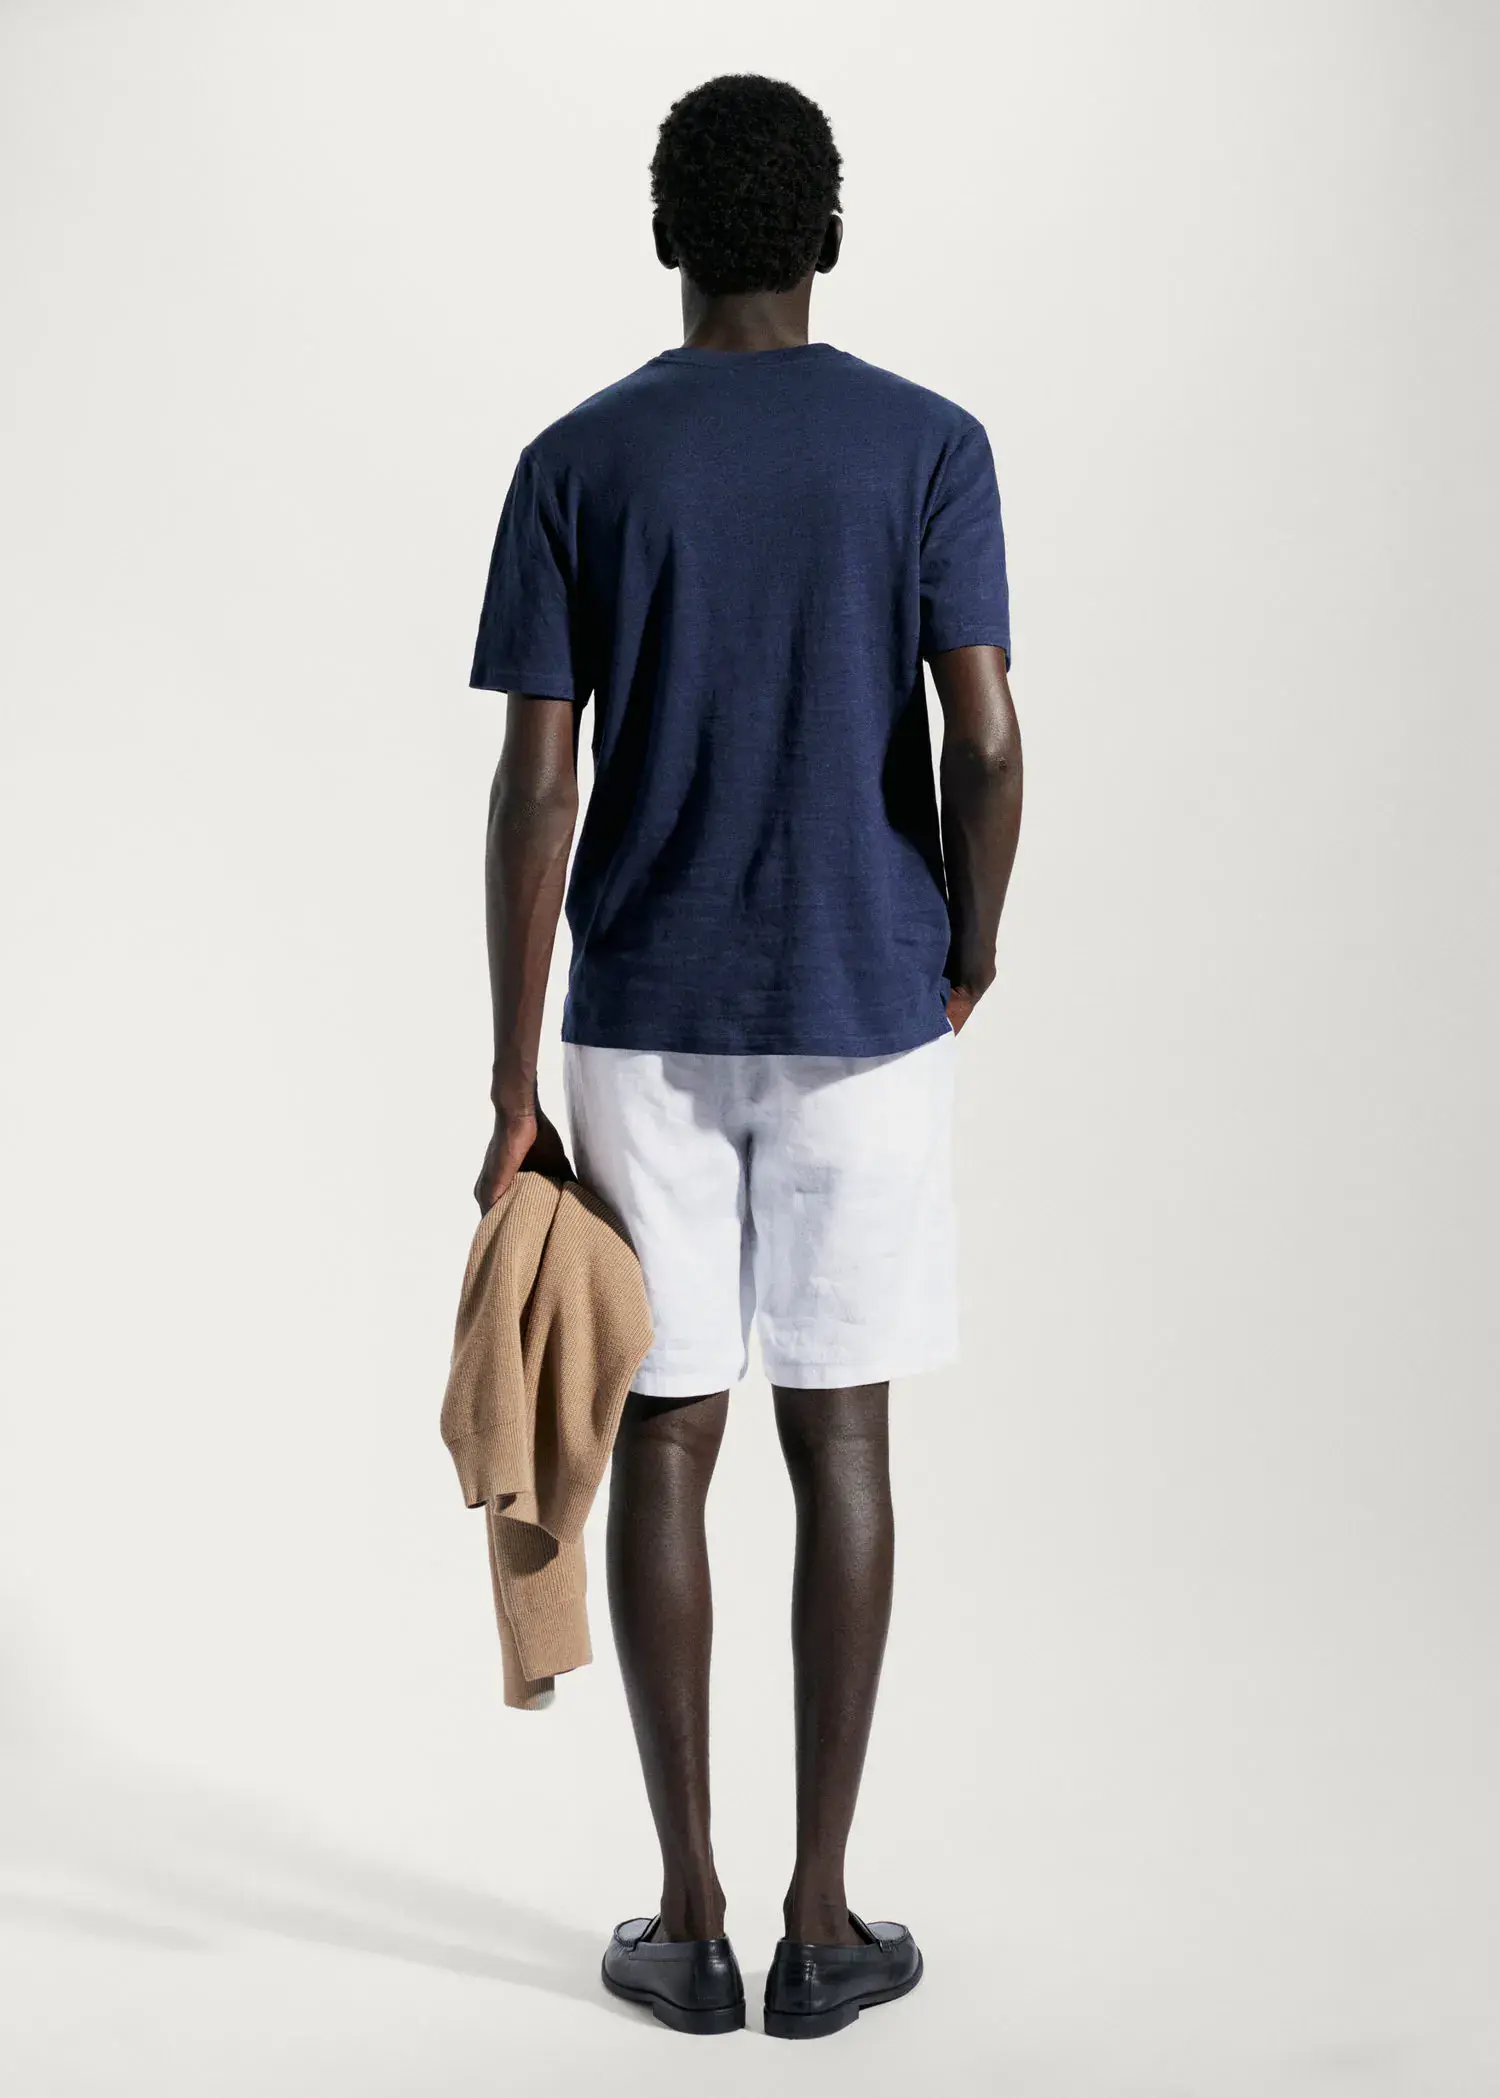 Mango Cotton-linen pocket t-shirt. a man in shorts and a t-shirt is holding a jacket. 